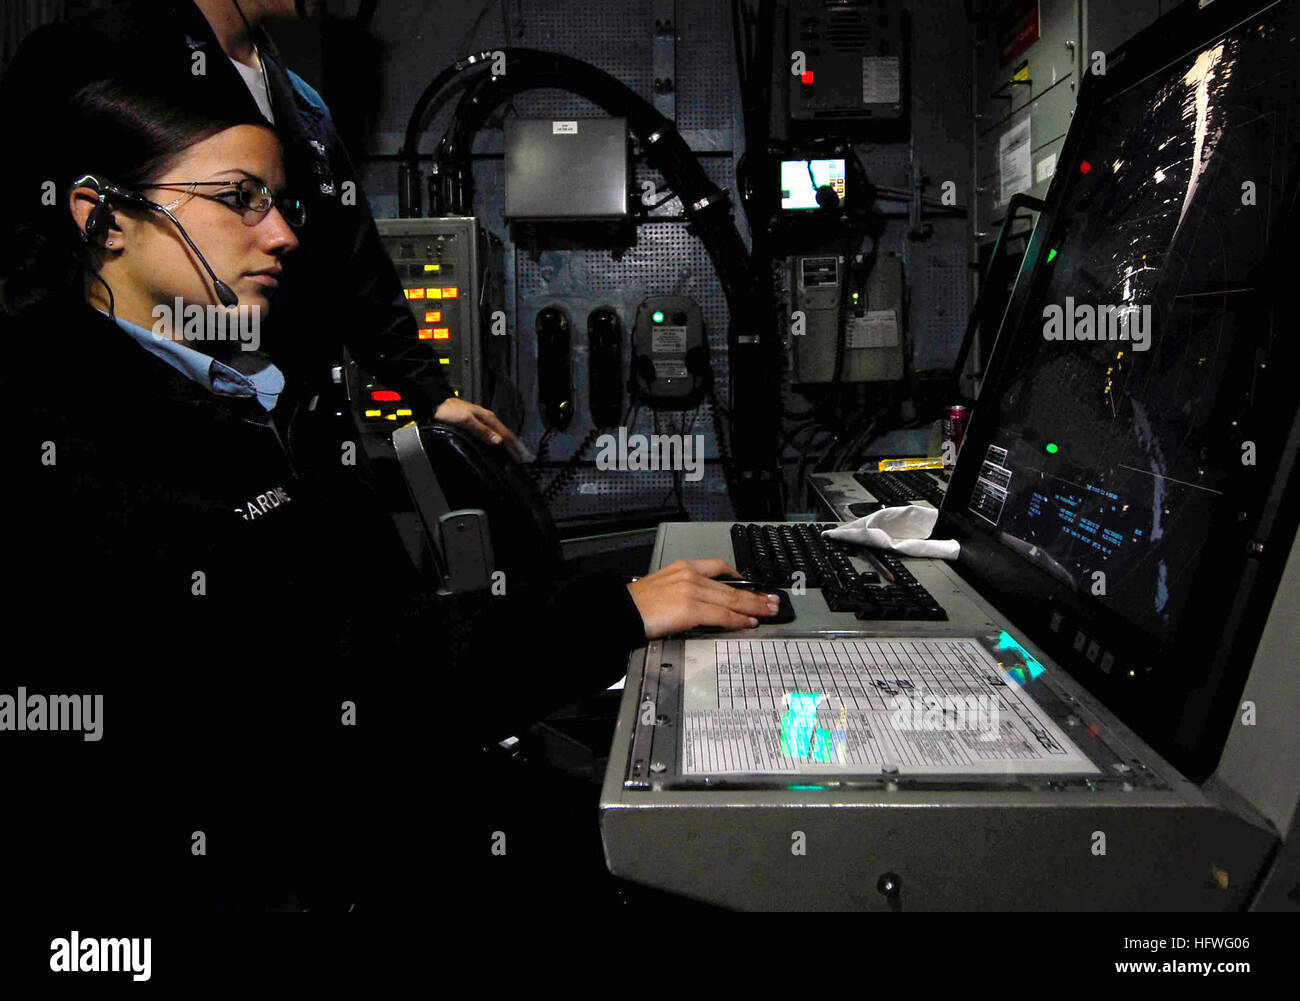 081017-N-9928E-042 PACIFIC OCEAN (Oct. 17, 2008) Air Traffic Controller 2nd Class Valerie Gardner, from Kalamazoo, Mich., stands watch in the carrier air traffic control center aboard the Nimitz-class aircraft carrier USS John C. Stennis (CVN 74). Stennis is part of the John C. Stennis Carrier Strike Group conducting composite training unit exercises off the coast of Southern California.  (U.S. Navy photo by Mass Communication Specialist 3rd Class Josue L. Escobosa/Released) US Navy 081017-N-9928E-042 Air Traffic Controller 2nd Class Valerie Gardner stands watch in the carrier air traffic cont Stock Photo